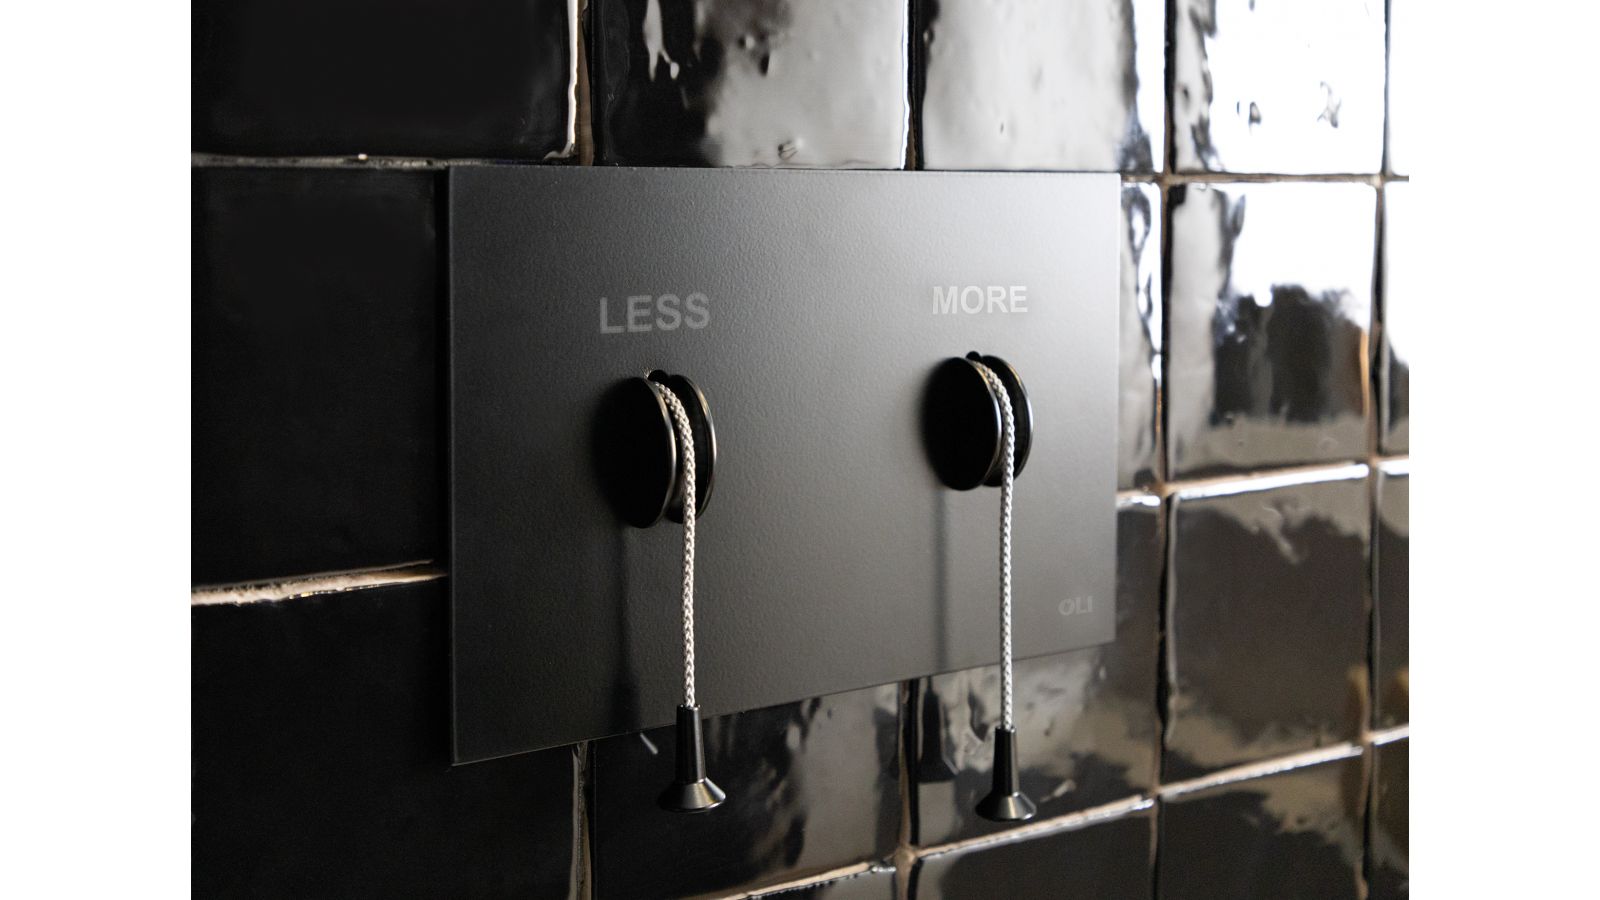 LESS IS MORE FLUSH PLATE